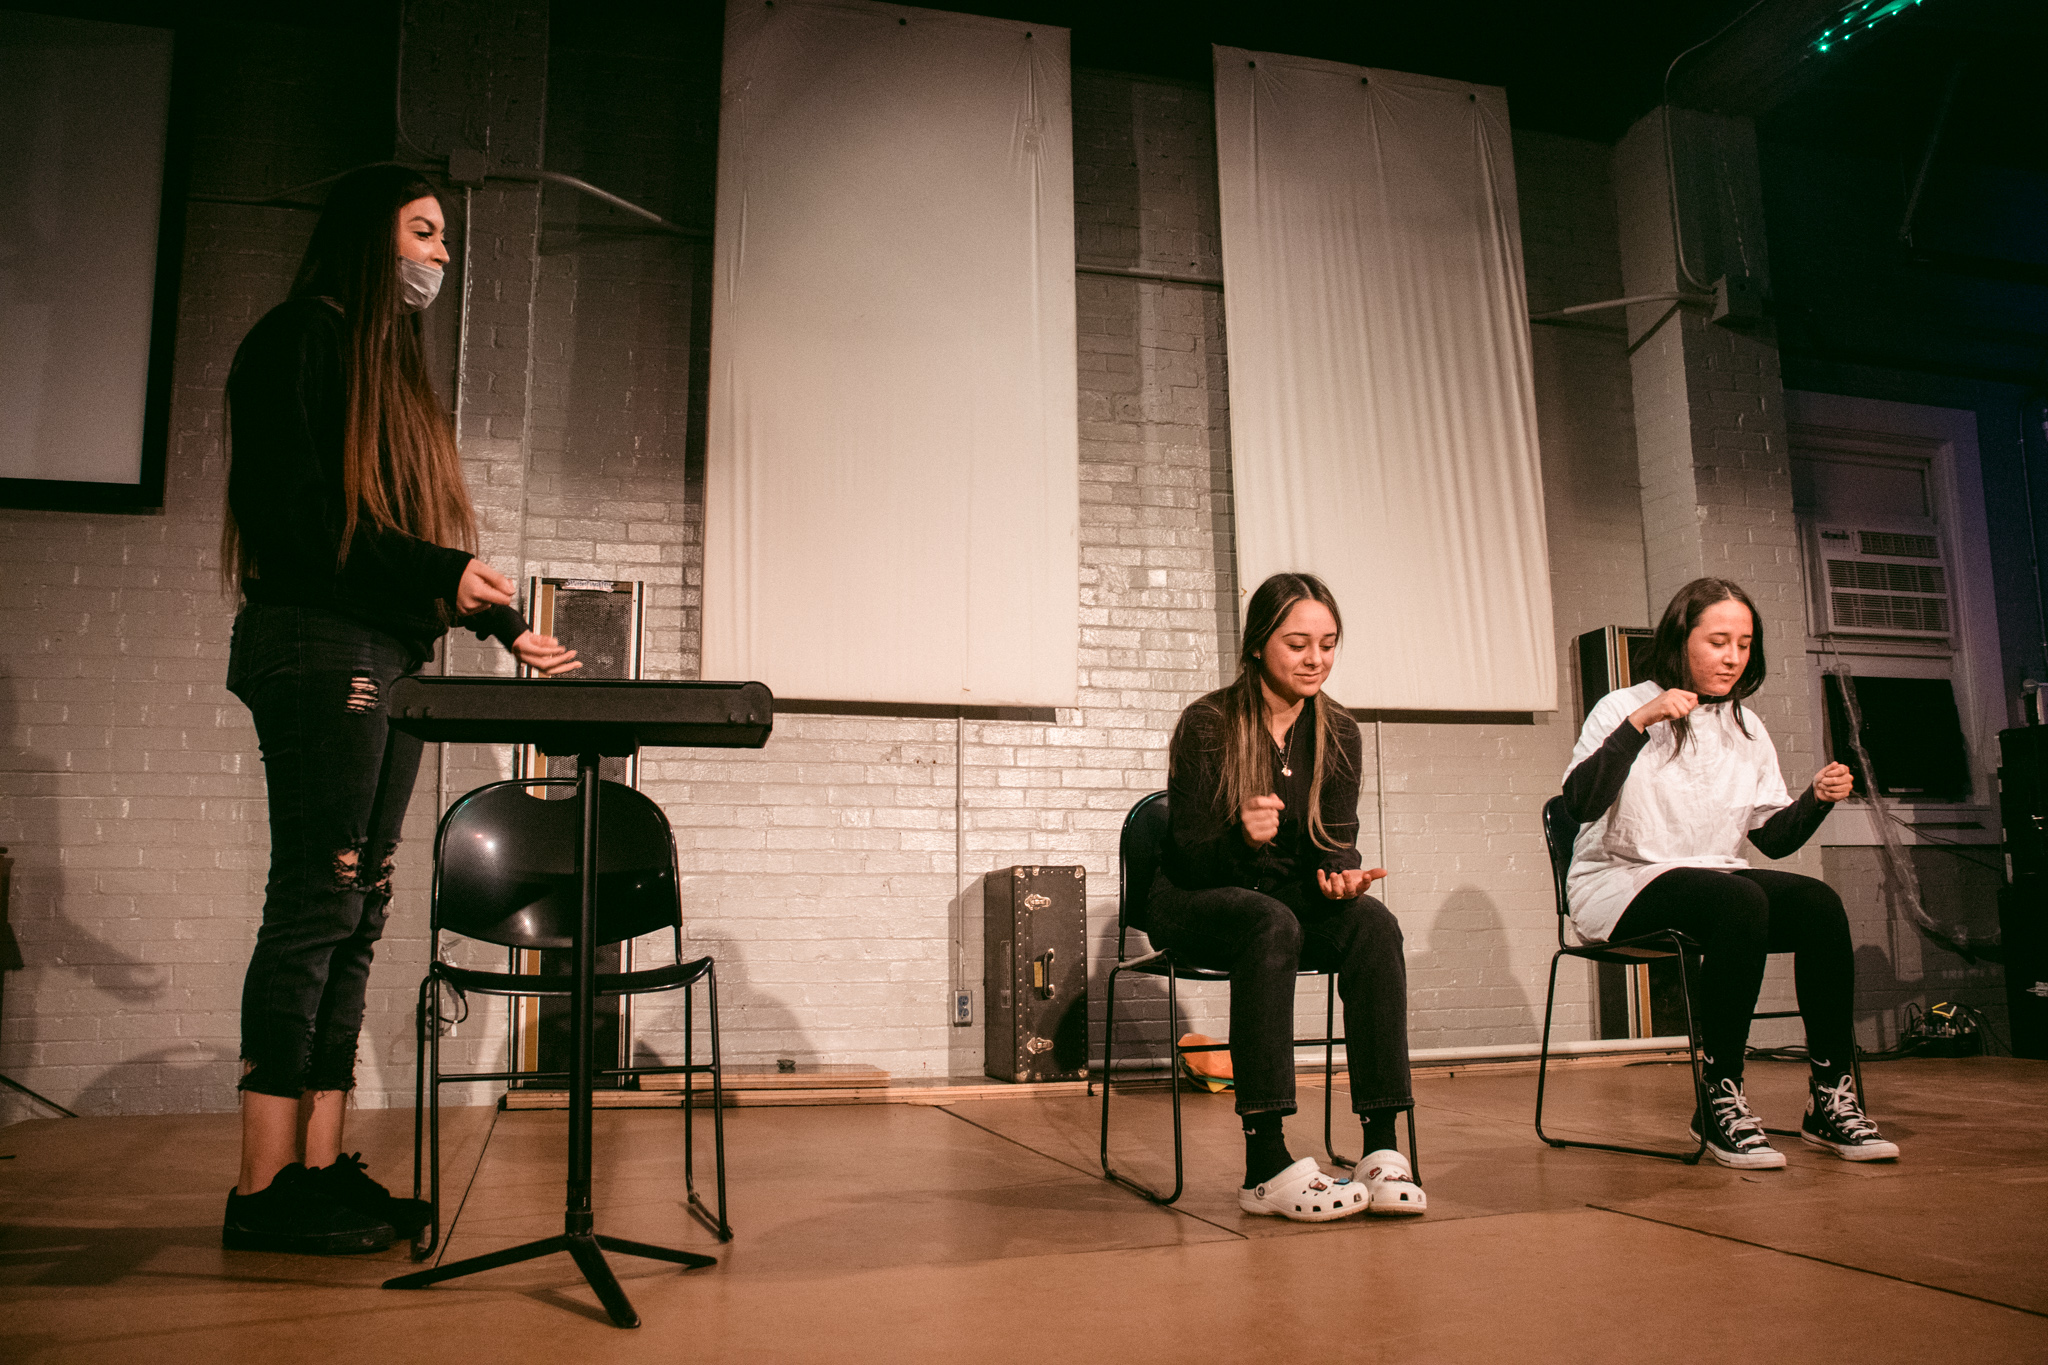 Three teenagers act on a.bare stage sitting on black plastic chairs and one standing at a music stand